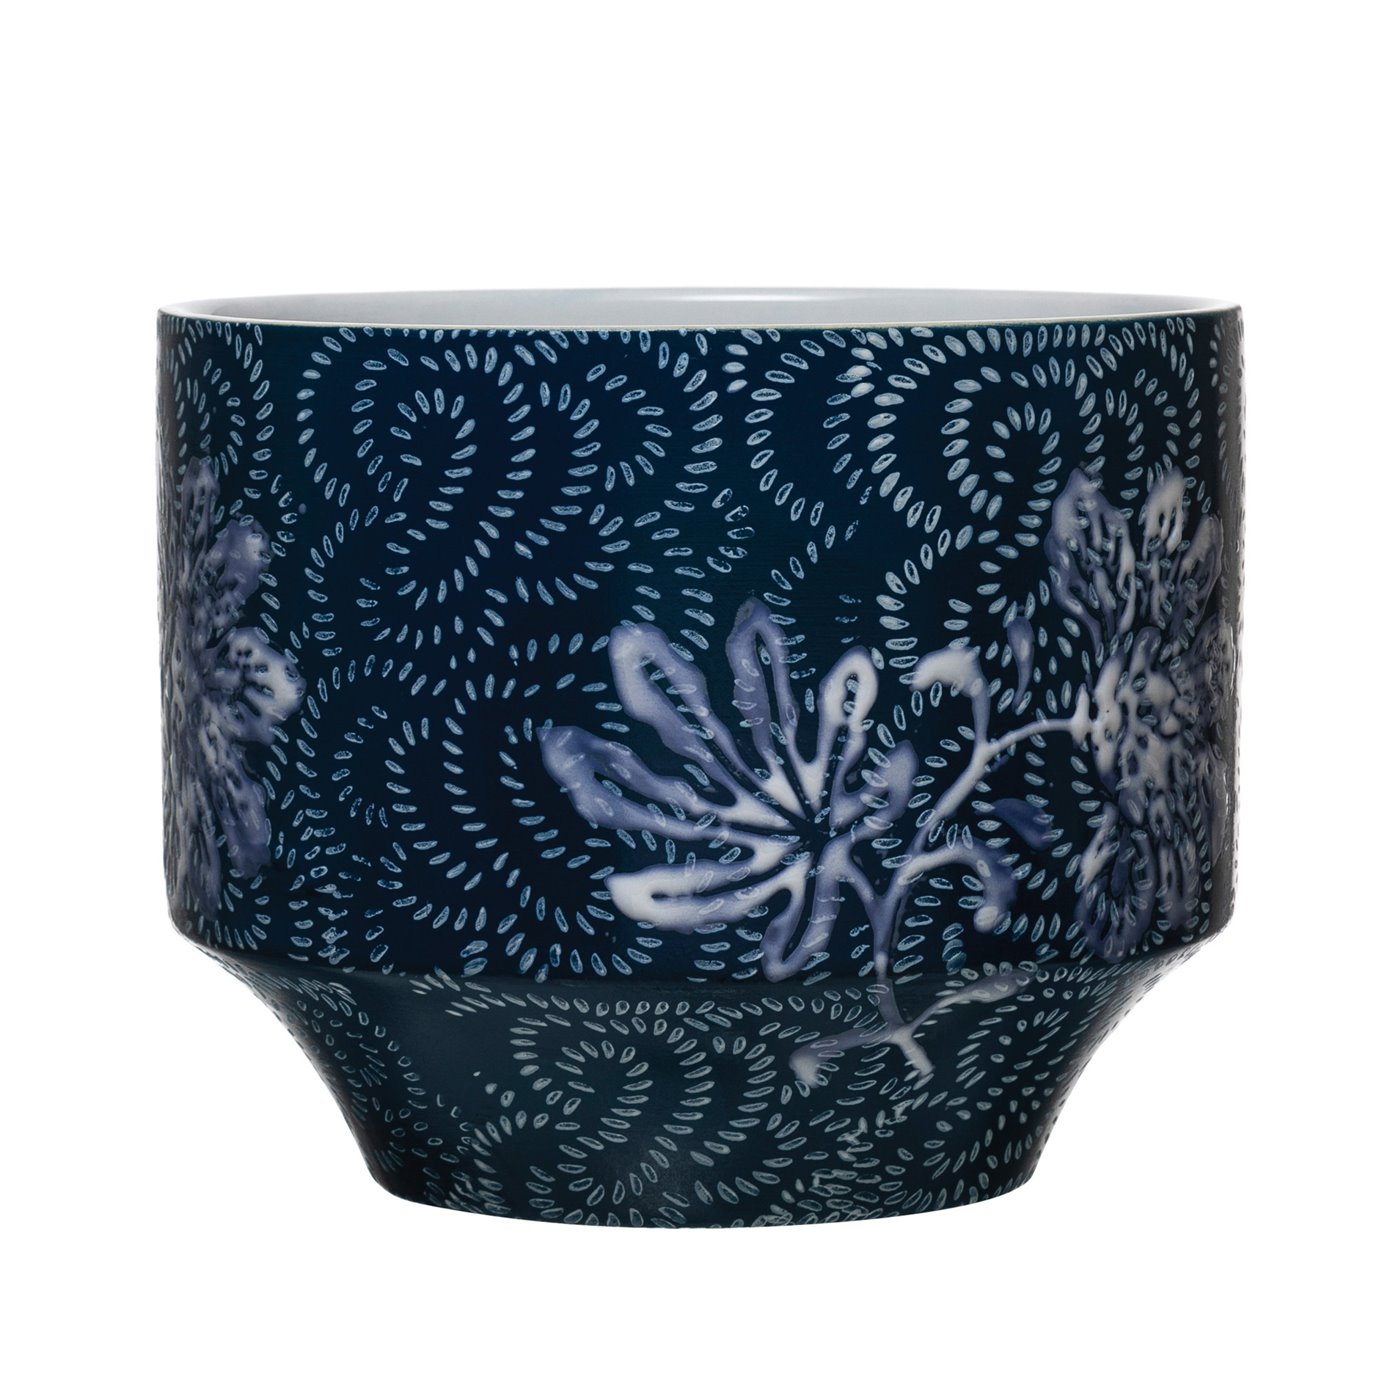 Stoneware Planter with Floral Pattern, Blue & White (Holds 4" Pot)